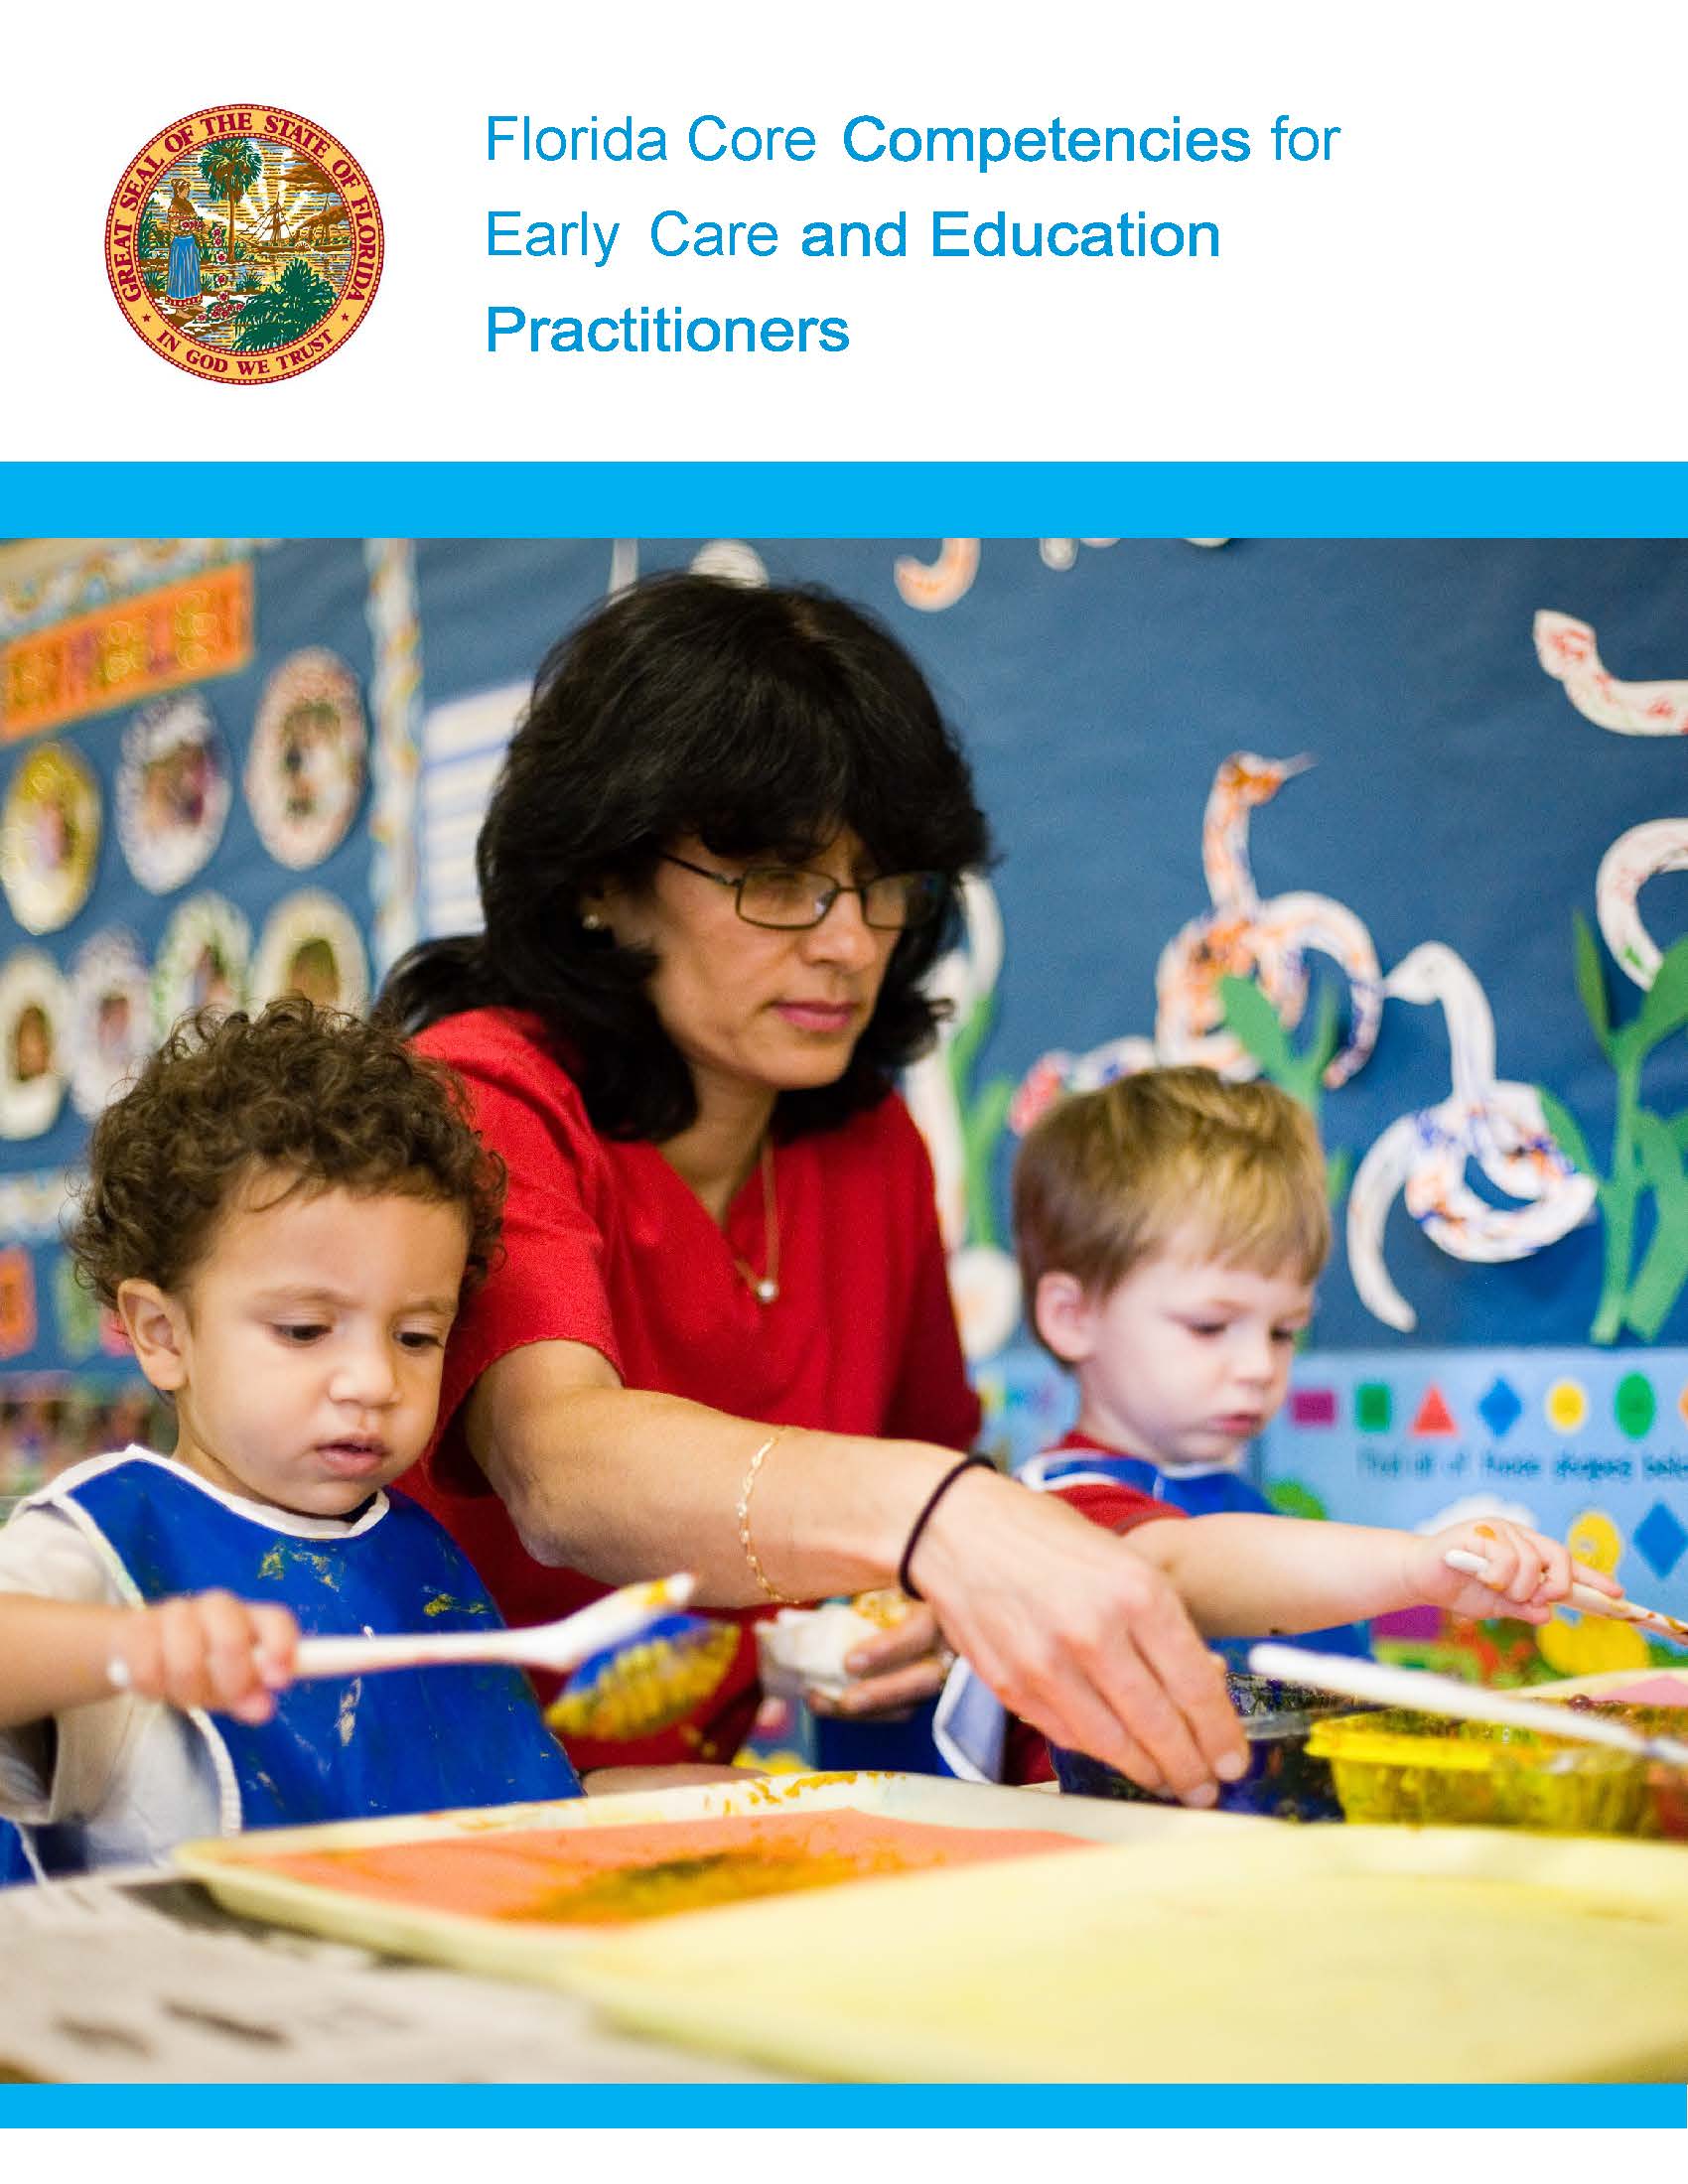 Florida Core Competencies for Early Care and Education Practitioners guide cover